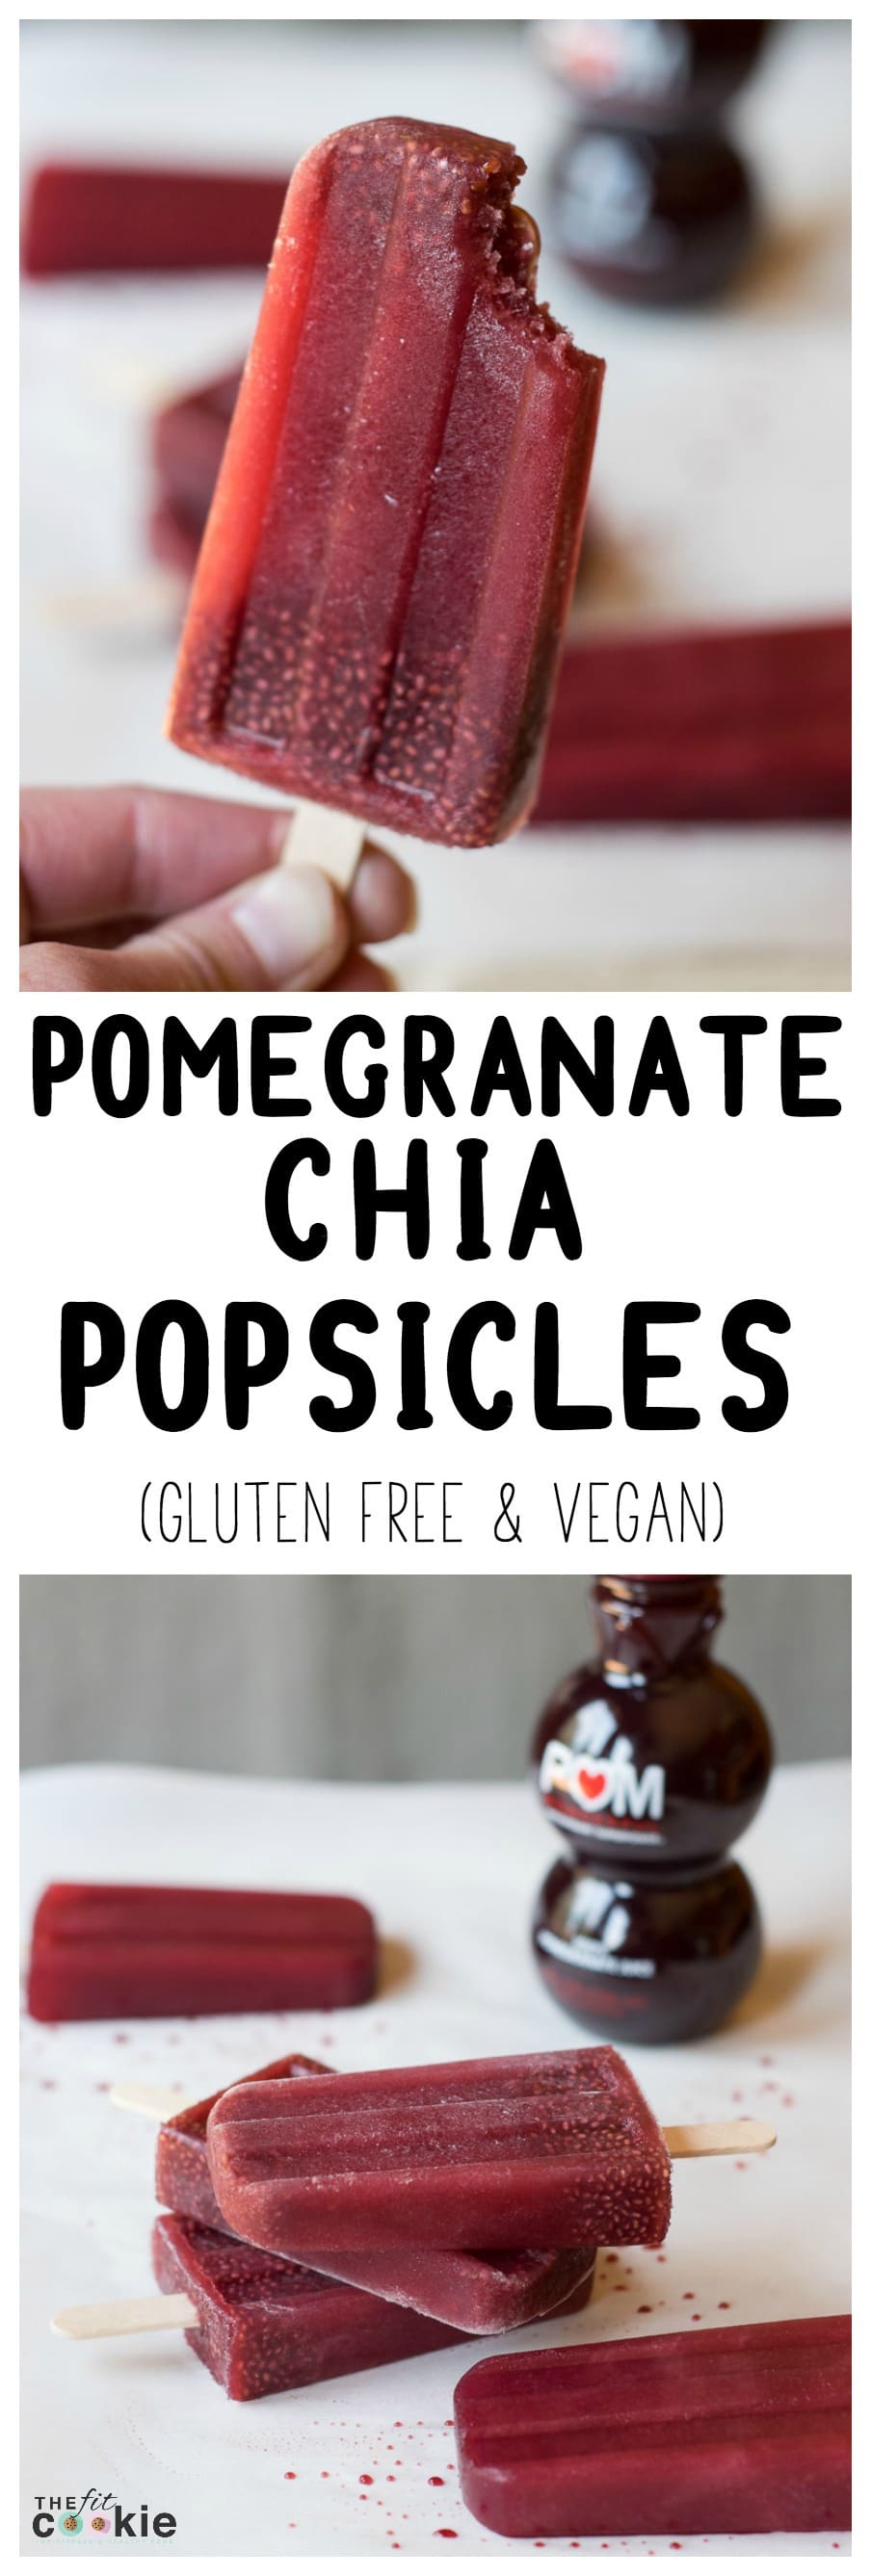 Looking for a new way to fuel your muscles after a workout? Make some Pomegranate Chia Popsicles with POM Wonderful® - they are full of antioxidants and potassium (plus a POM Wonderful® Prize Pack giveaway!) #AD @TheFitCookie #CrazyHealthy #POMWonderful